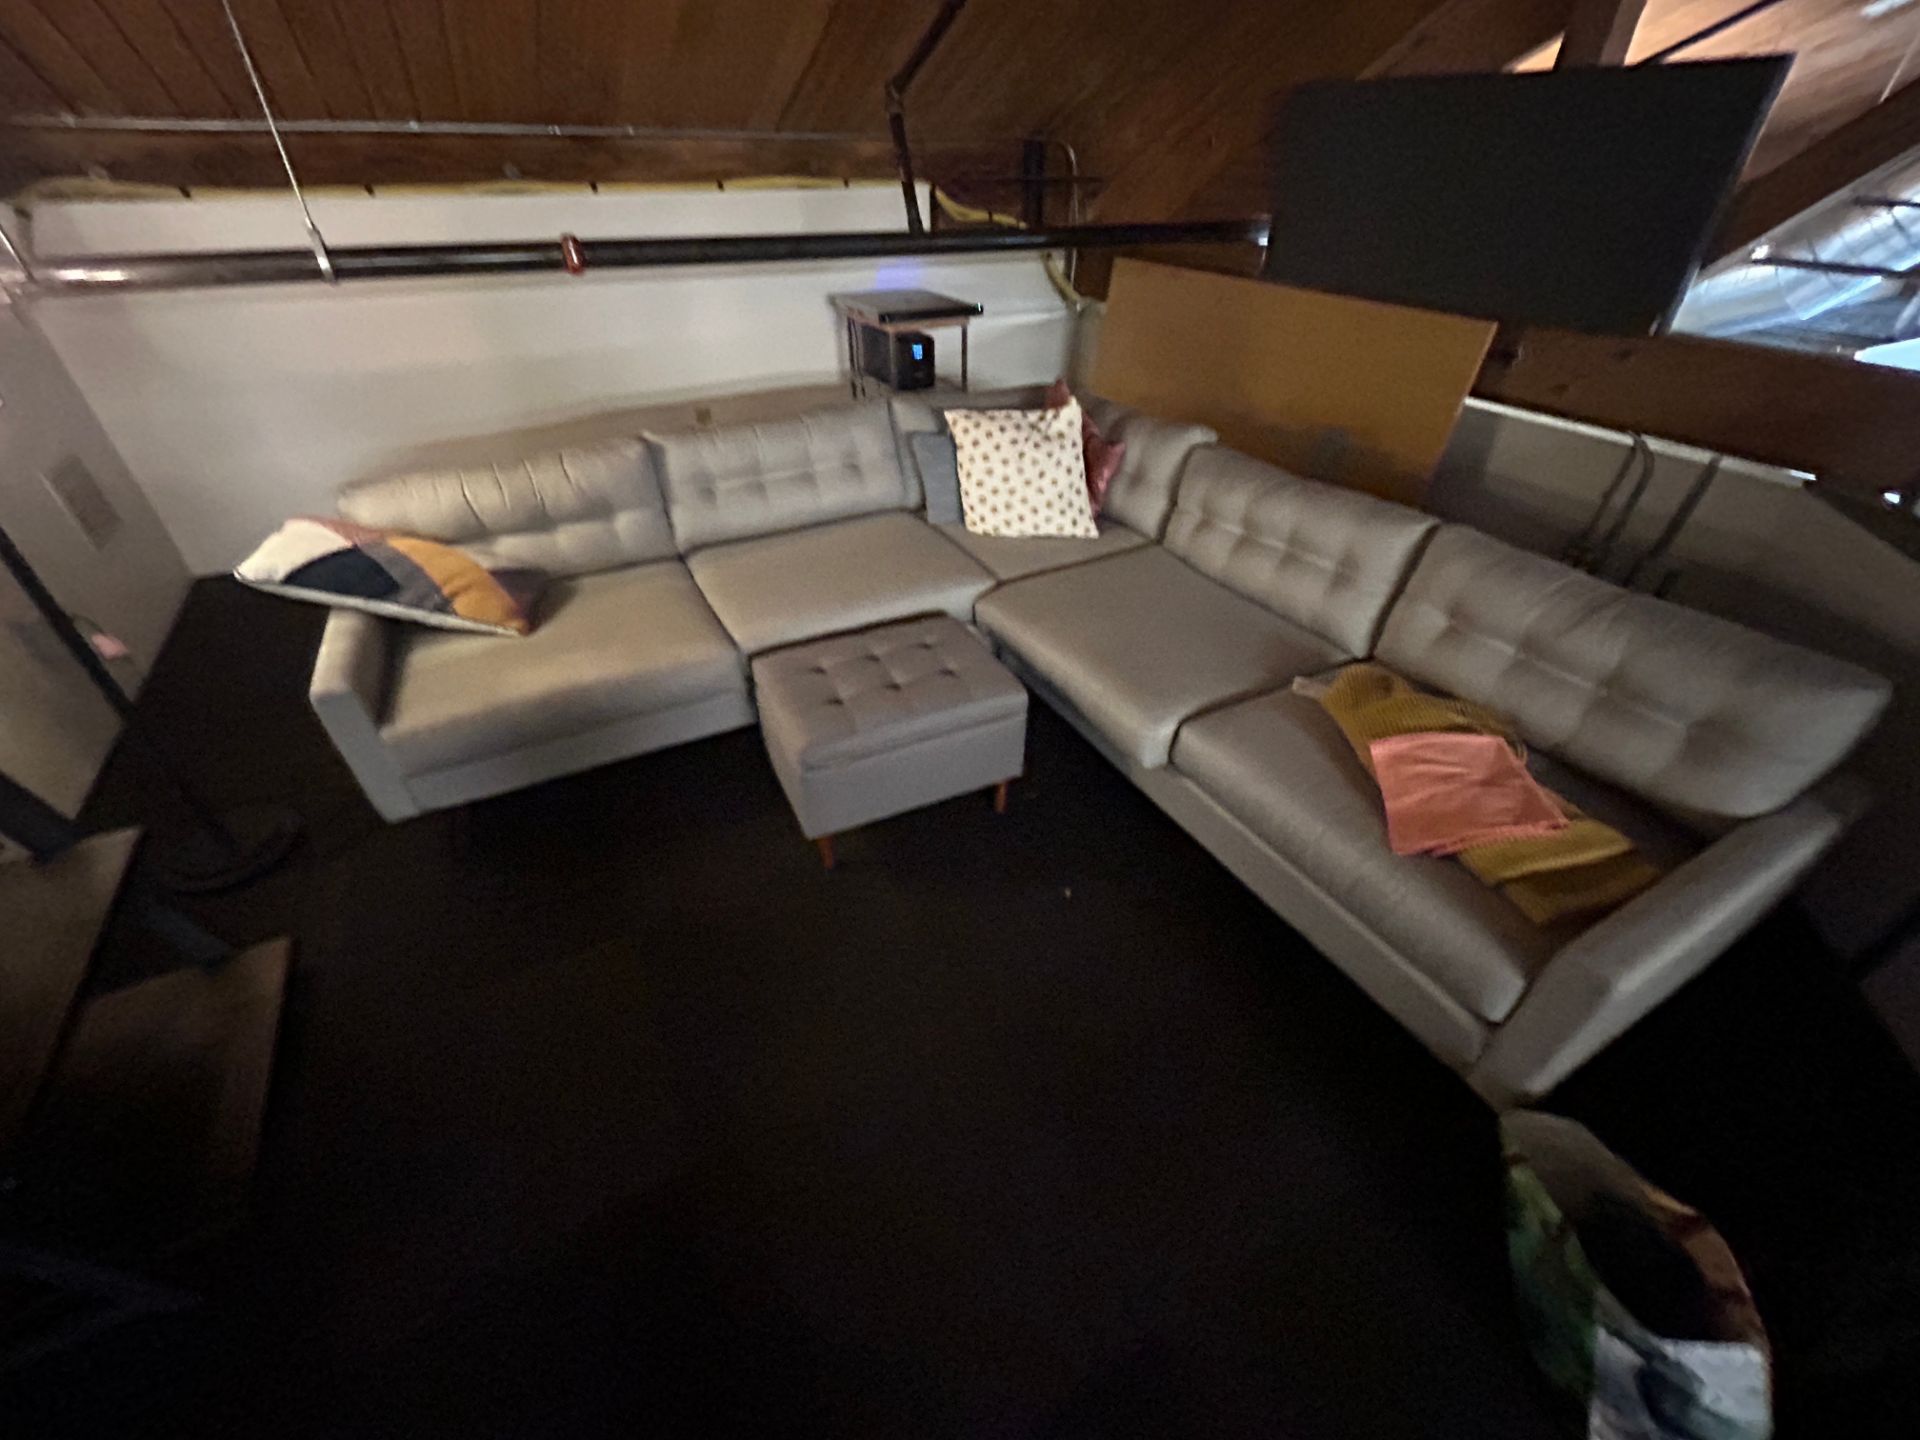 Lot - Cloth Sectional Couch, (2) Matching Lamps, Cantilever Shelving Unit - Image 3 of 4